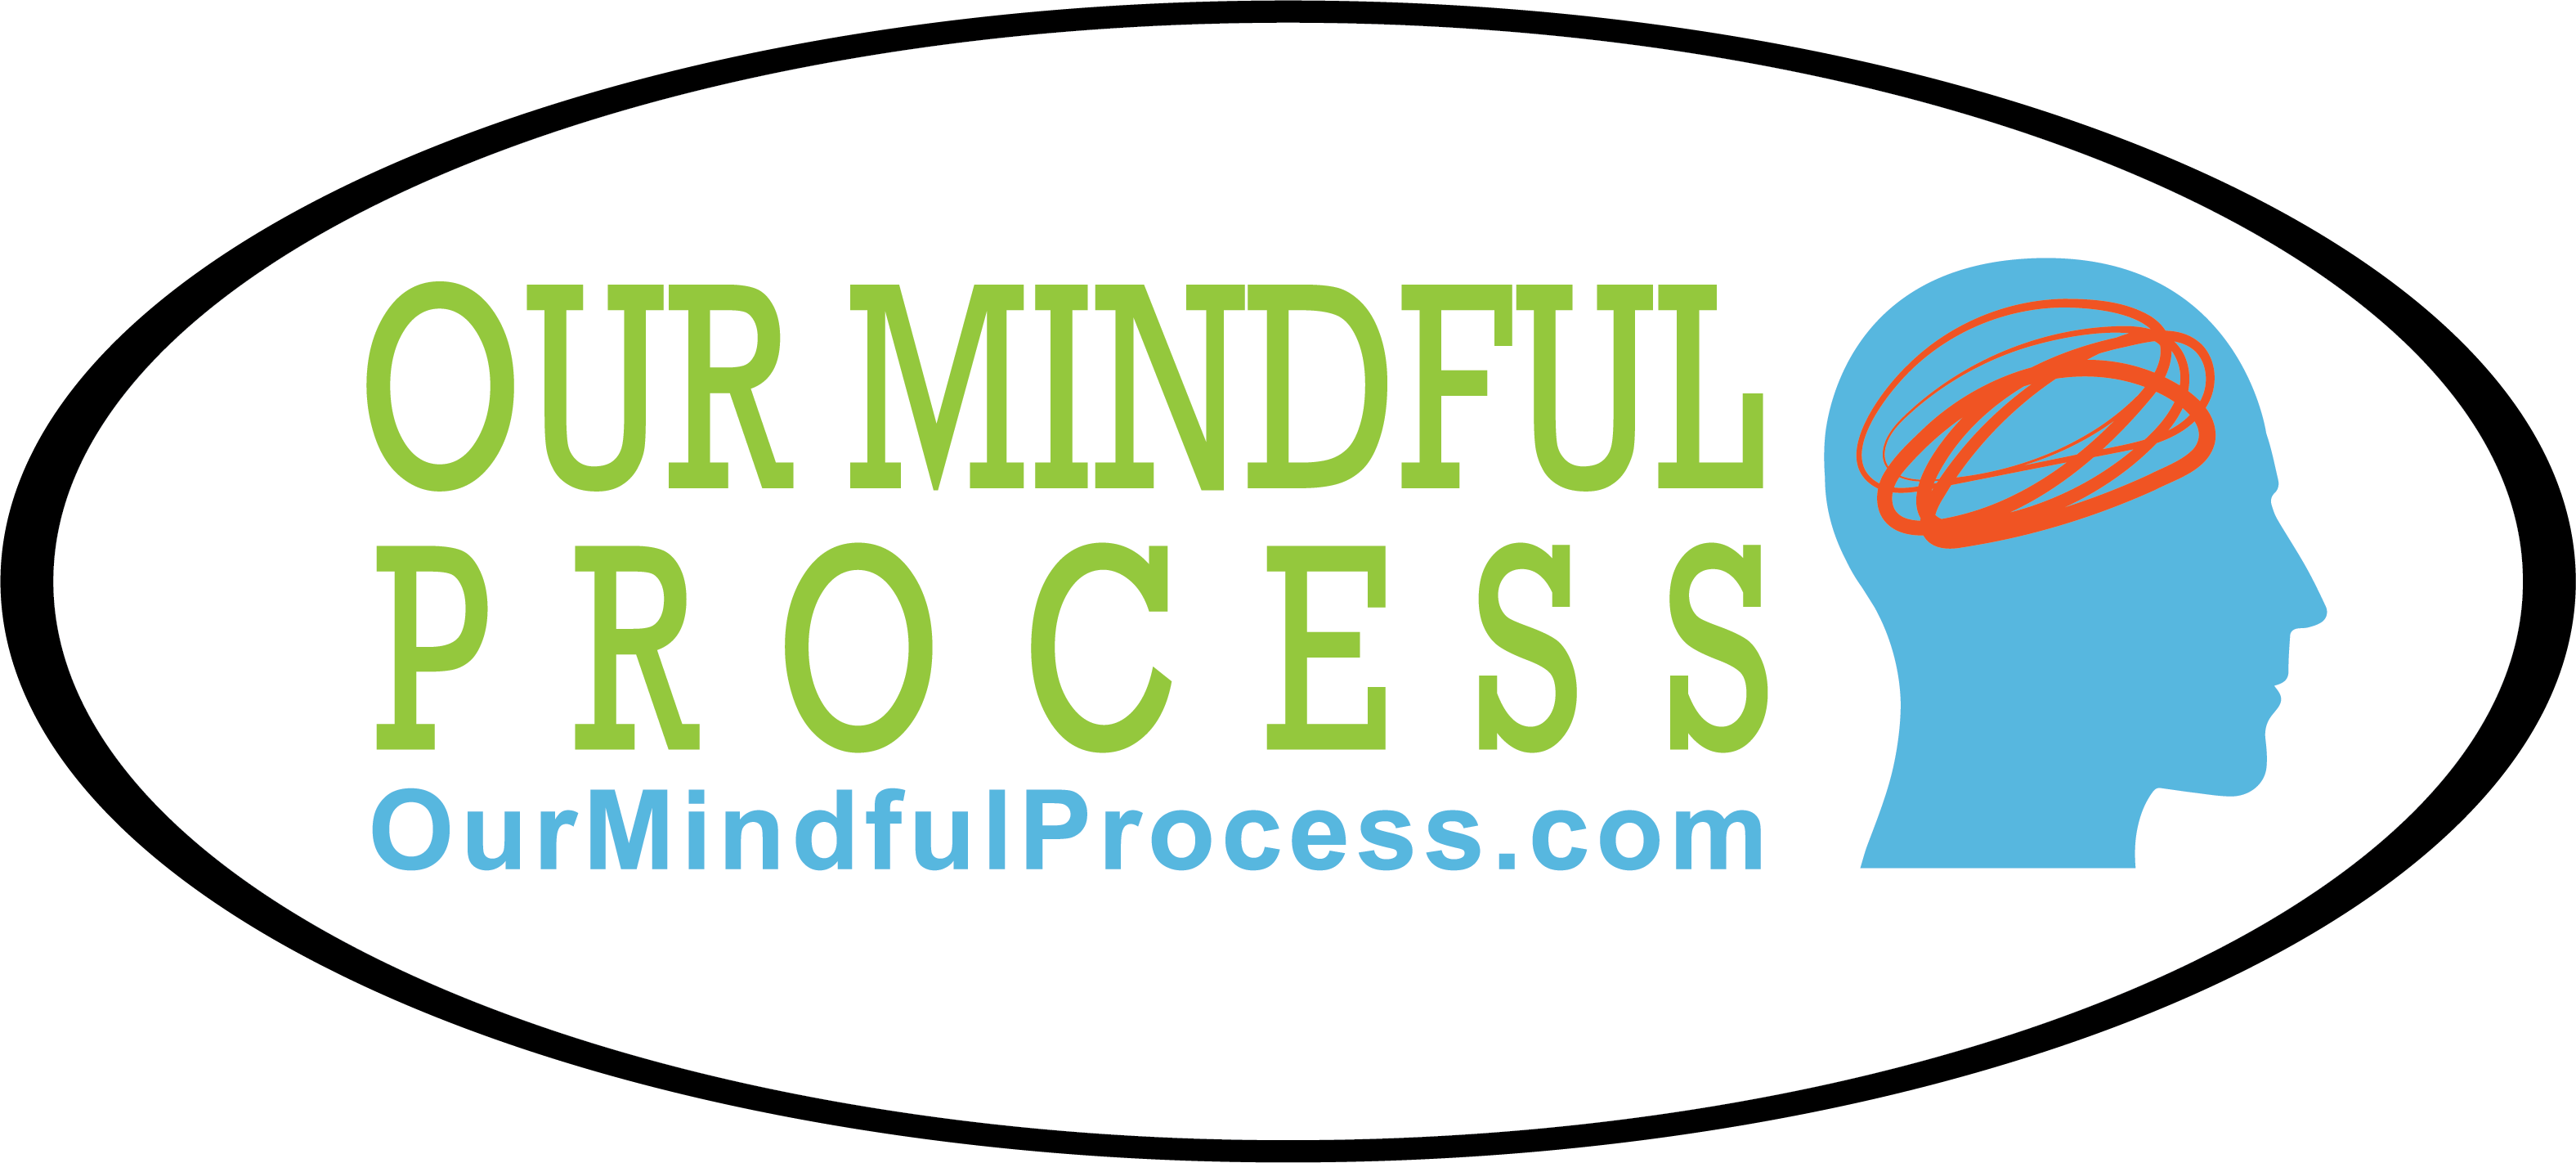 Our Mindful Process